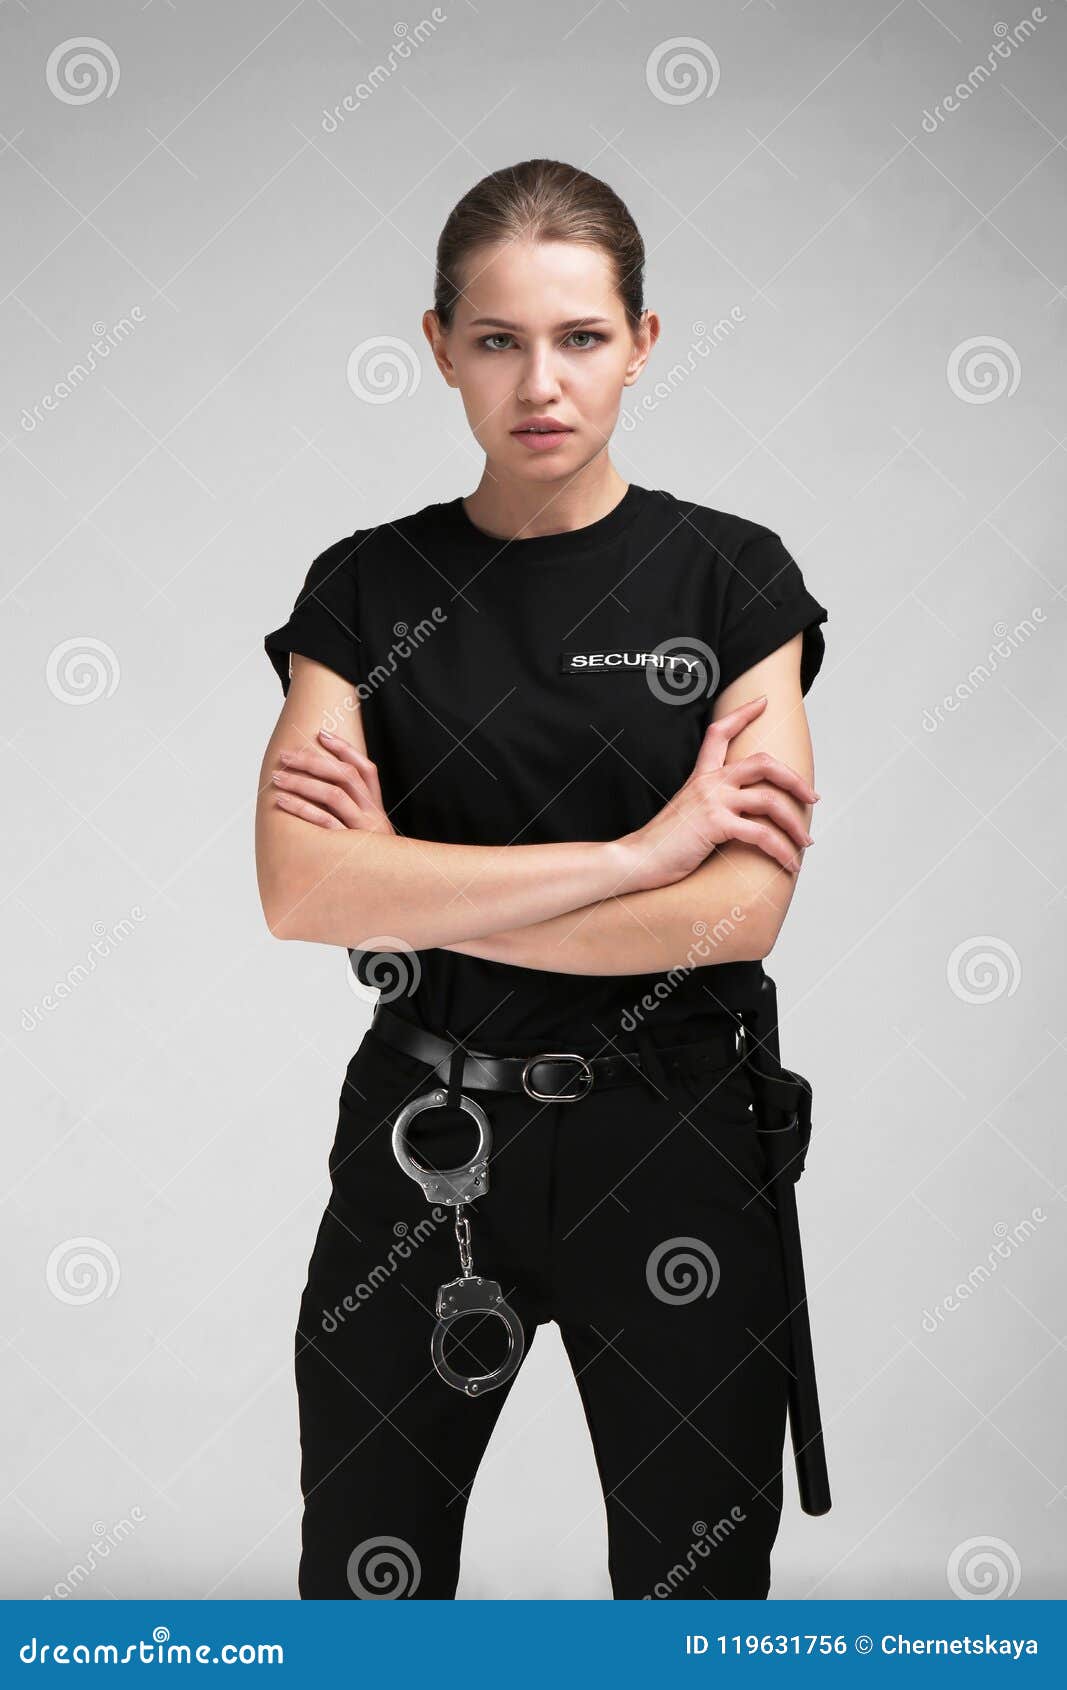 Female Security Guard In Uniform Stock Photo Image Of Protect